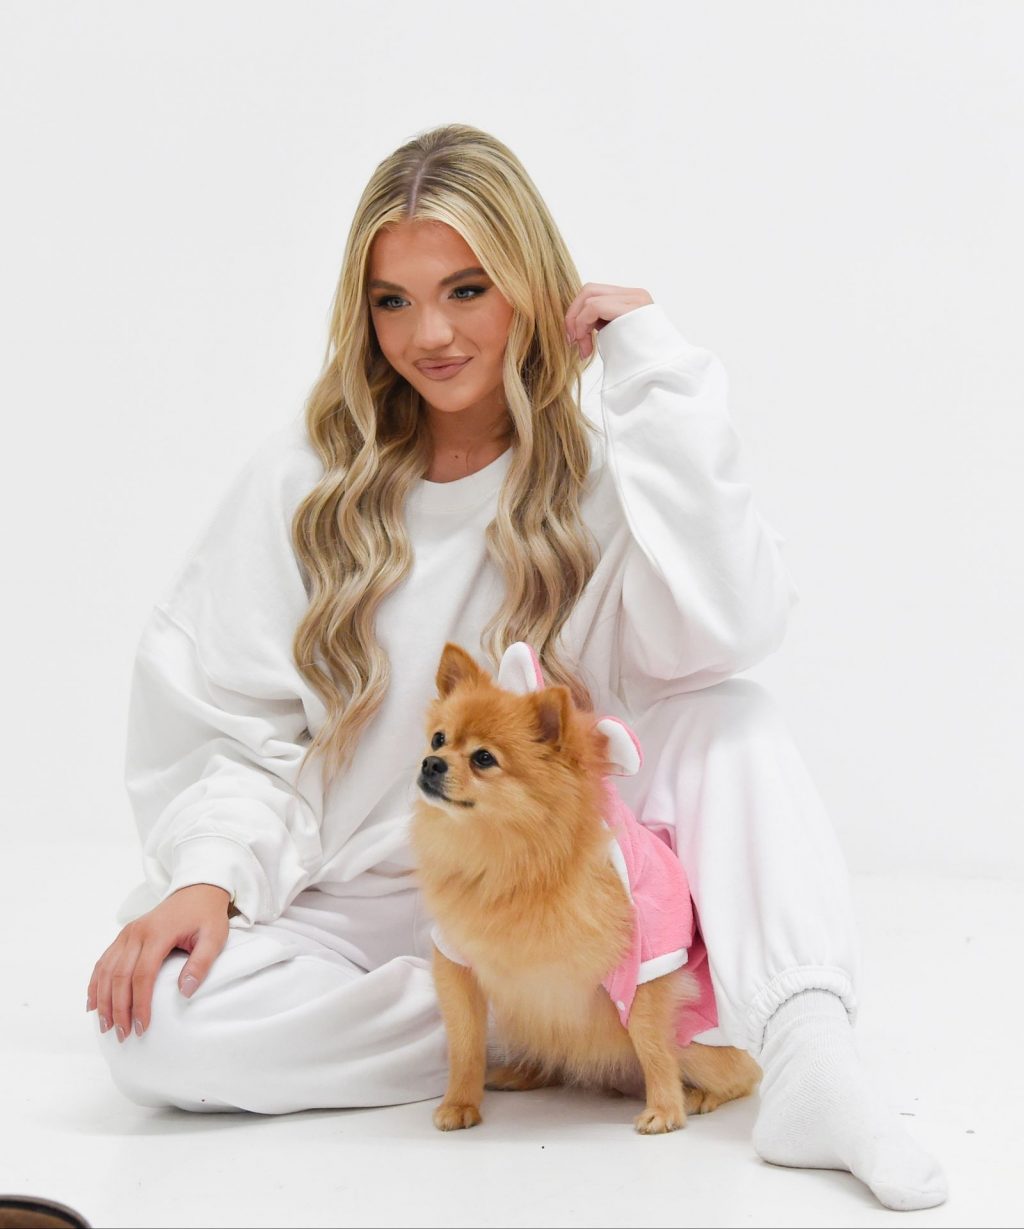 Molly Smith Poses with Her Dog for I Saw It First (48 Photos)